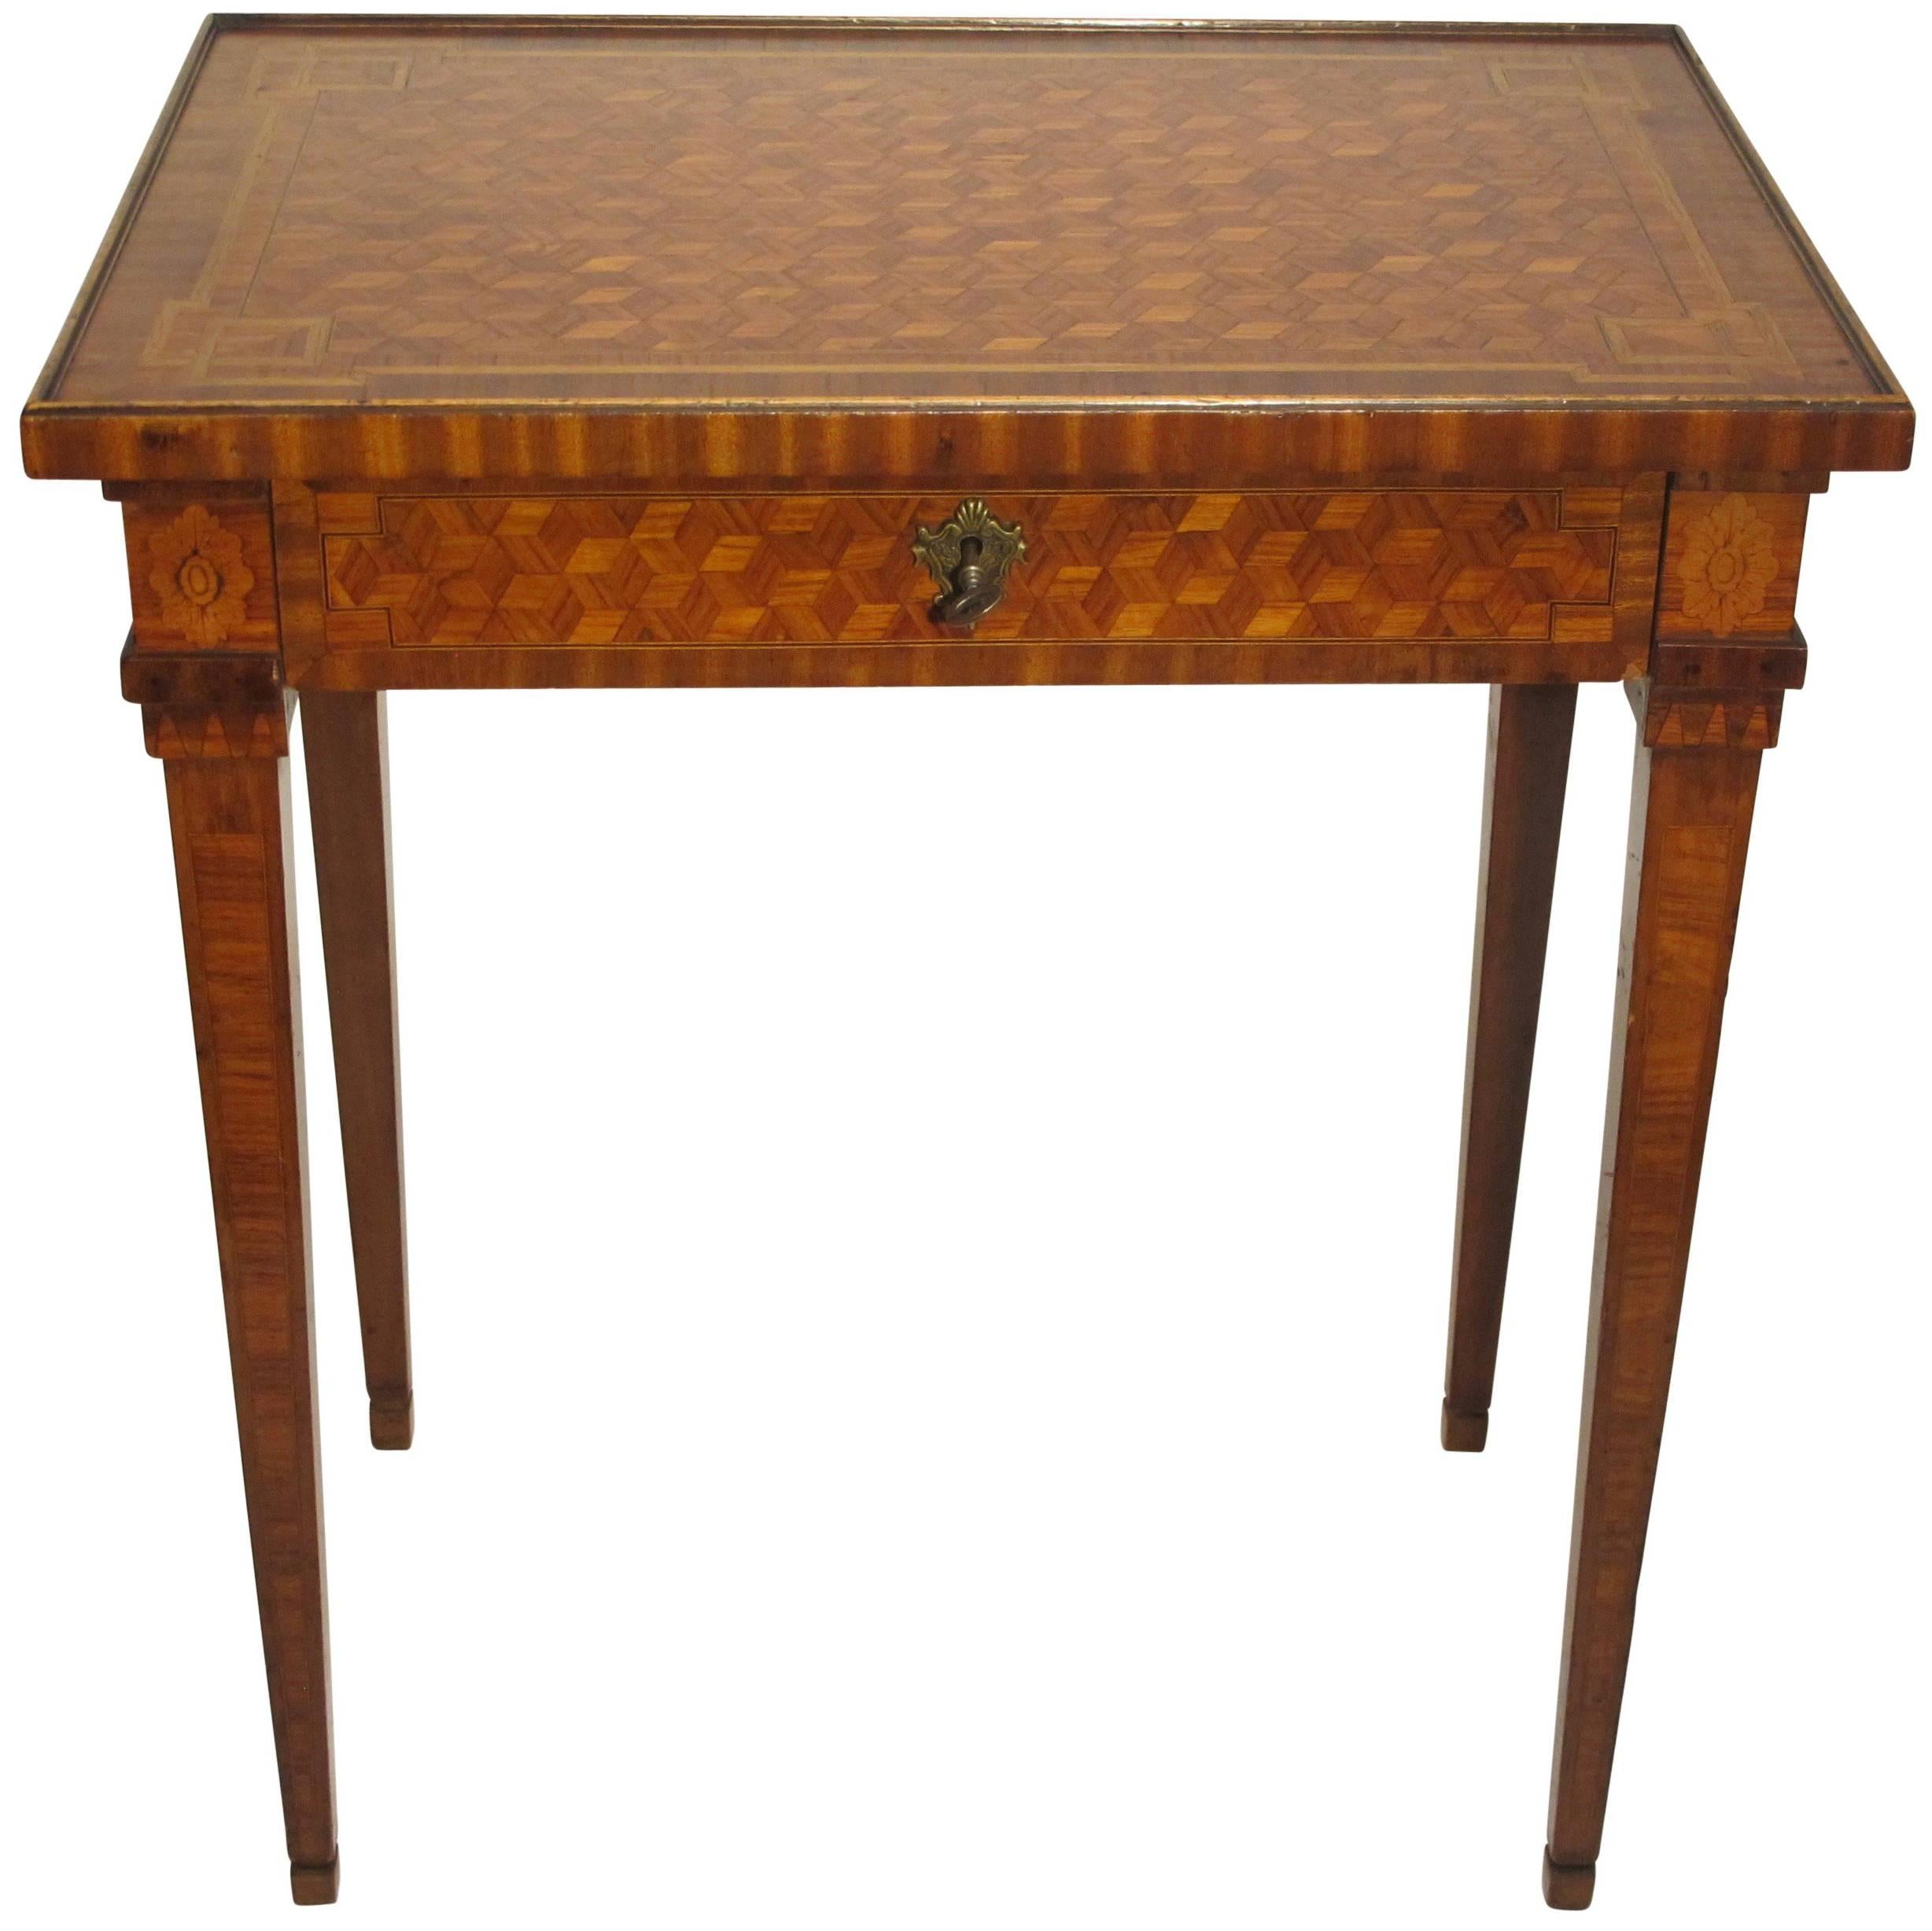 Walnut and Mixed Fruitwood Parquetry Side Table, French, 18th Century